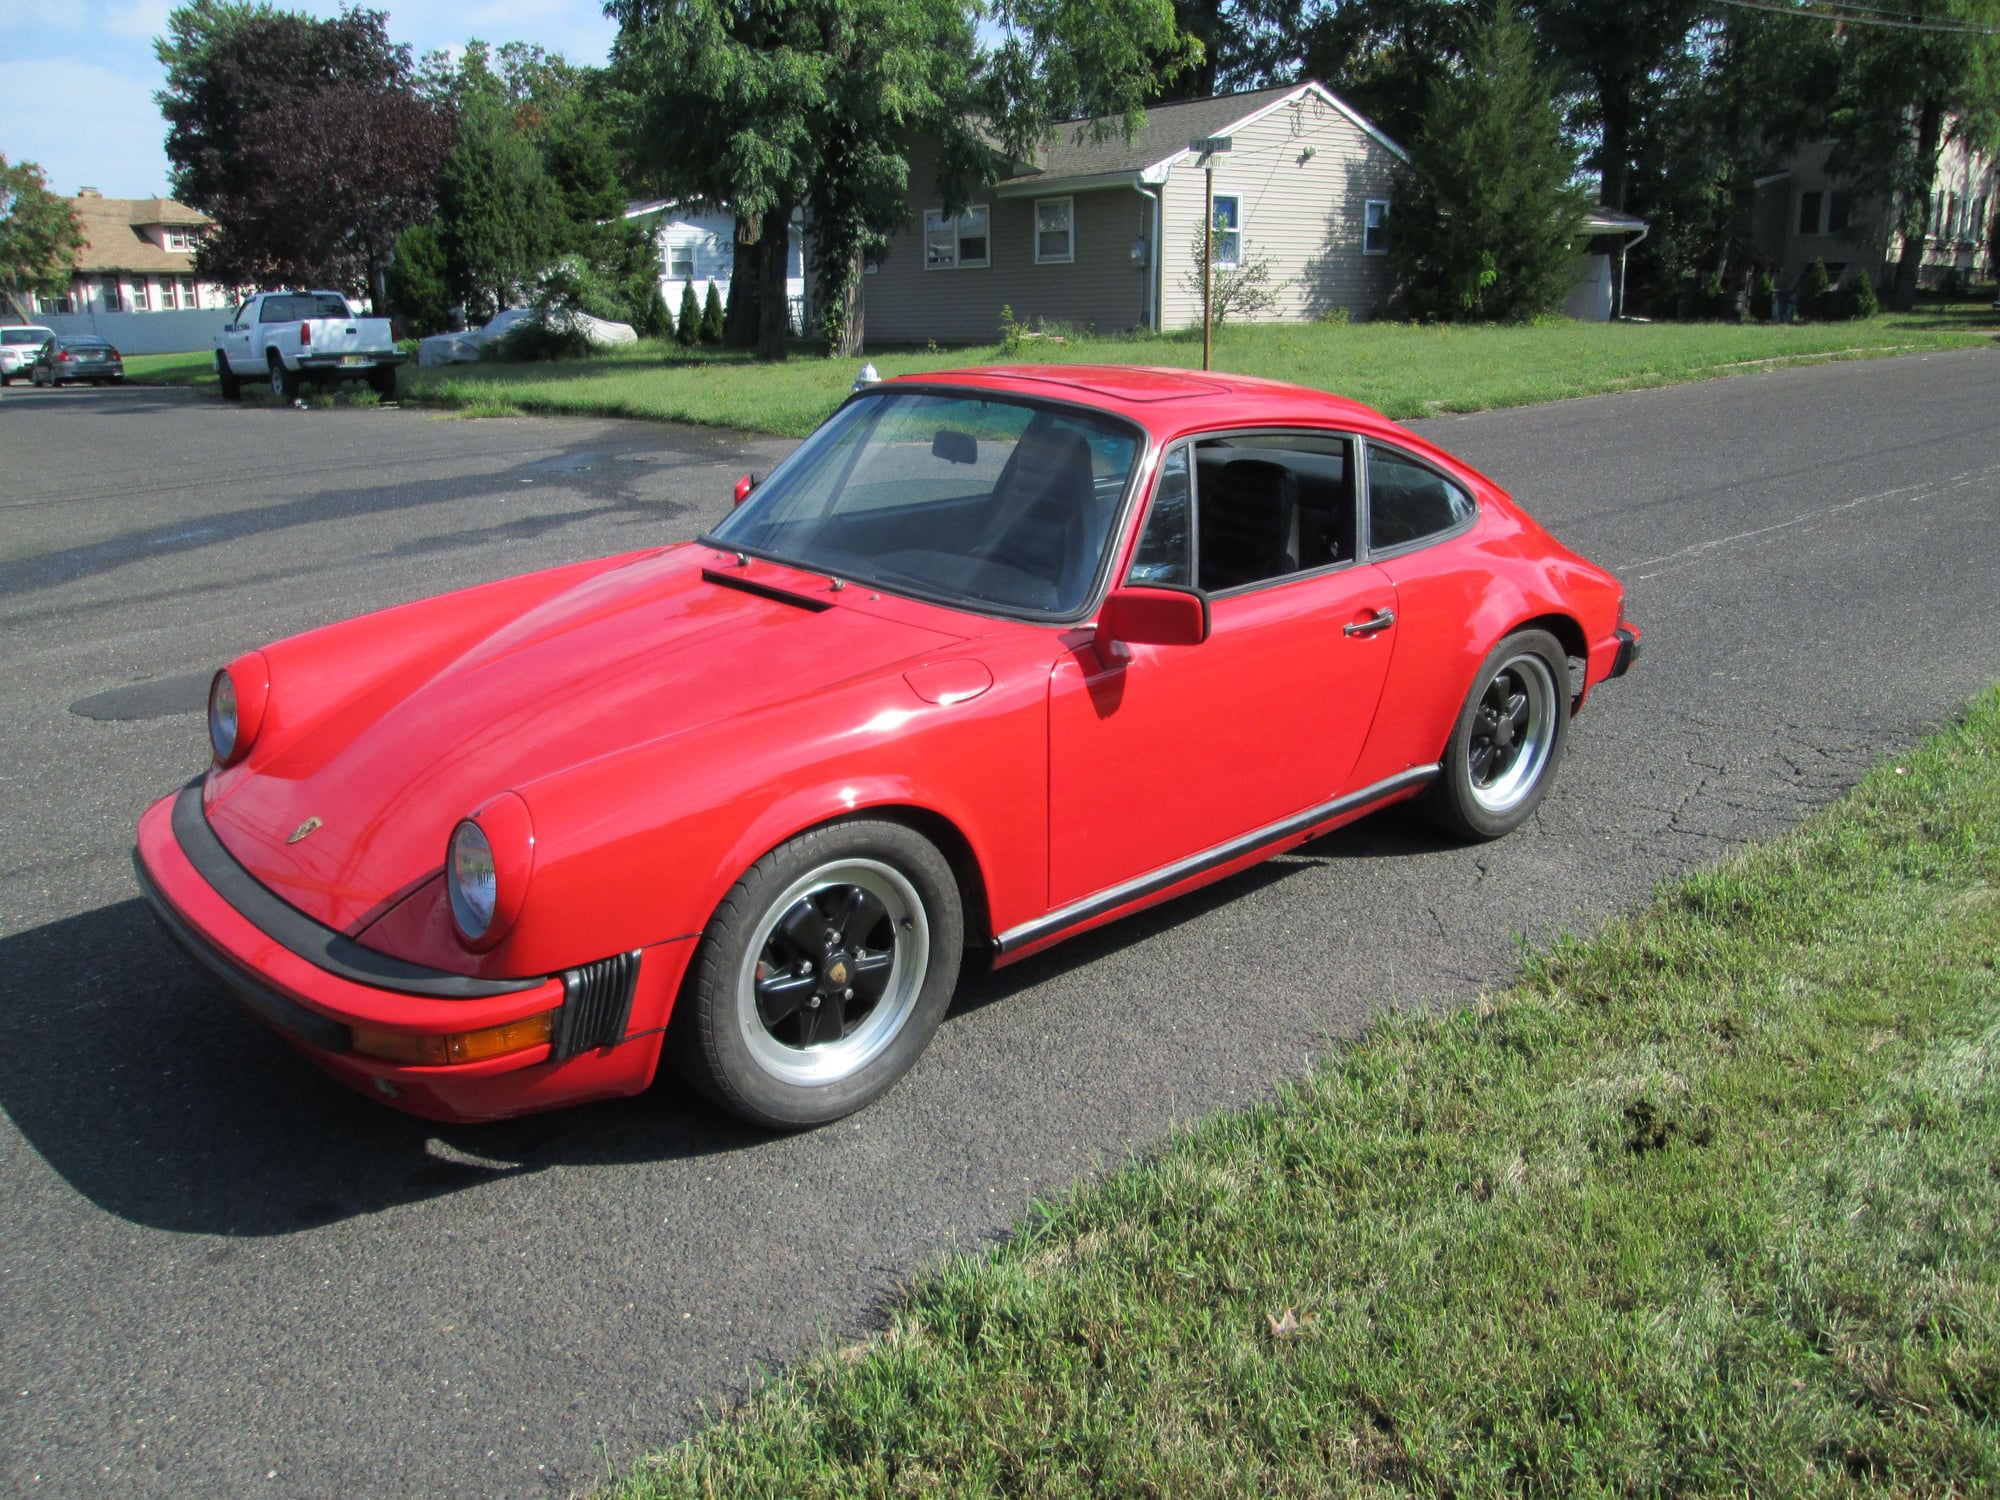 1981 Porsche 911 - 1981  porsche  911  SC - Used - VIN wp0aa0913bs120914 - 122,126 Miles - 6 cyl - 2WD - Manual - Coupe - Red - Merchantville, NJ 08109, United States